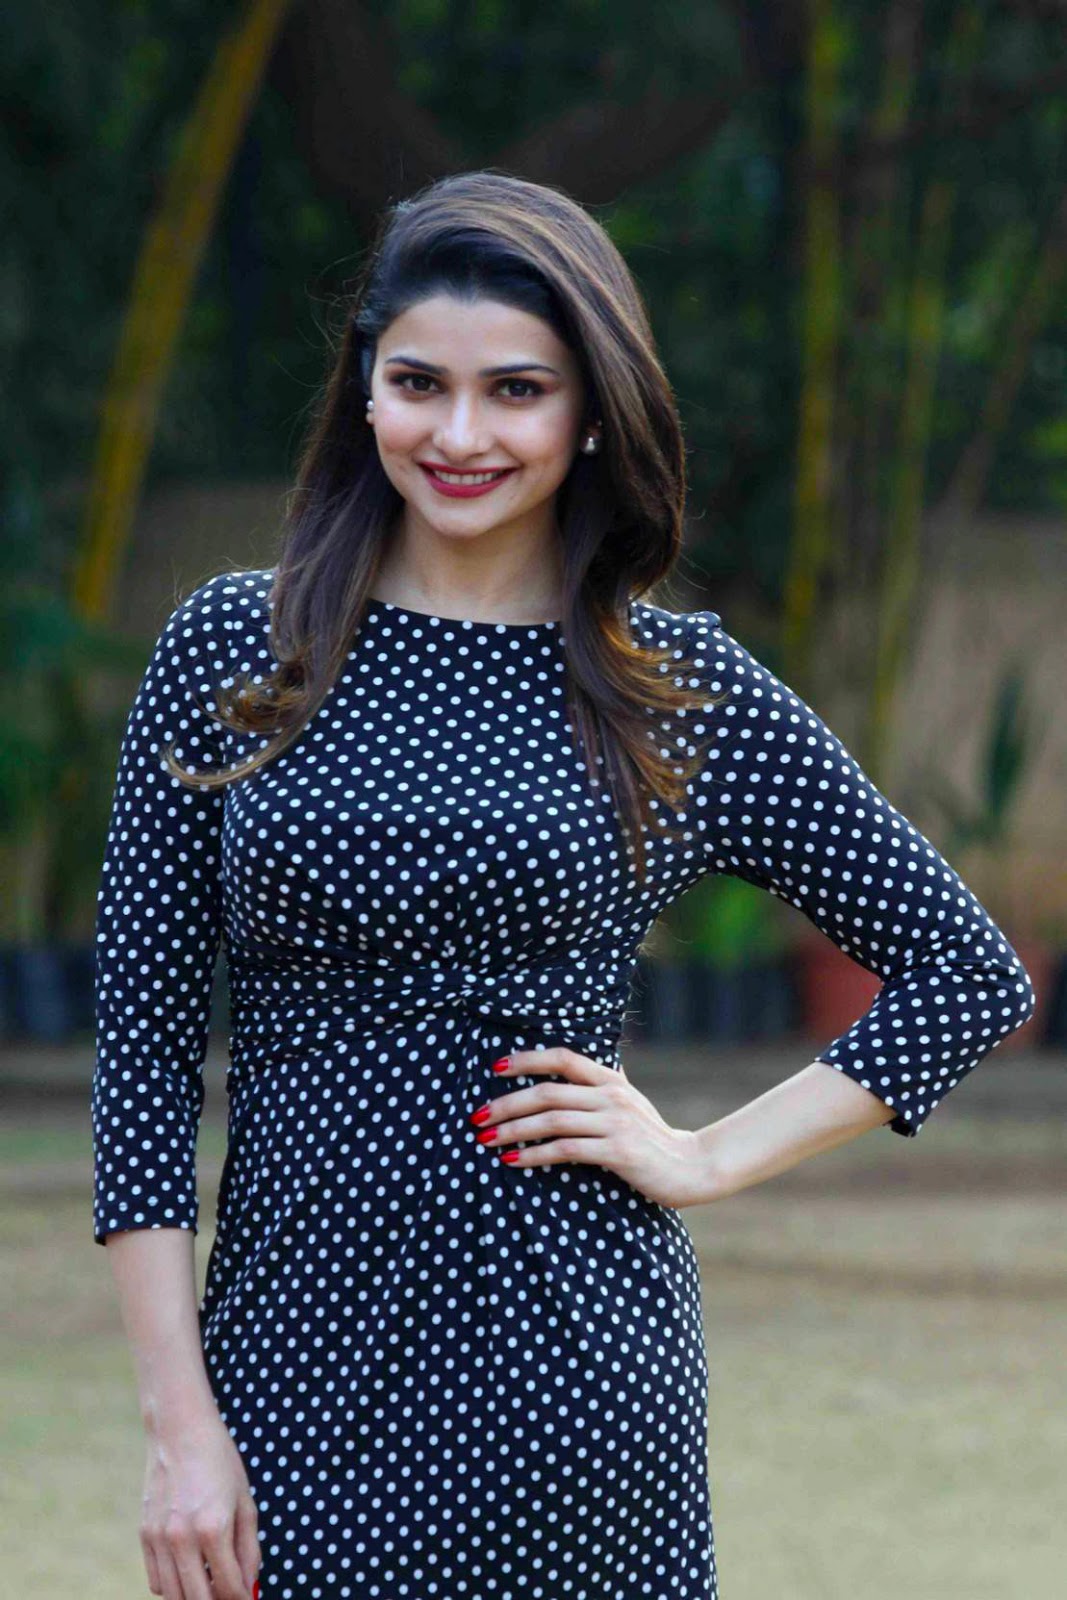 Milky Hot Thighs And Legs Of Indian Celebs Prachi Desai